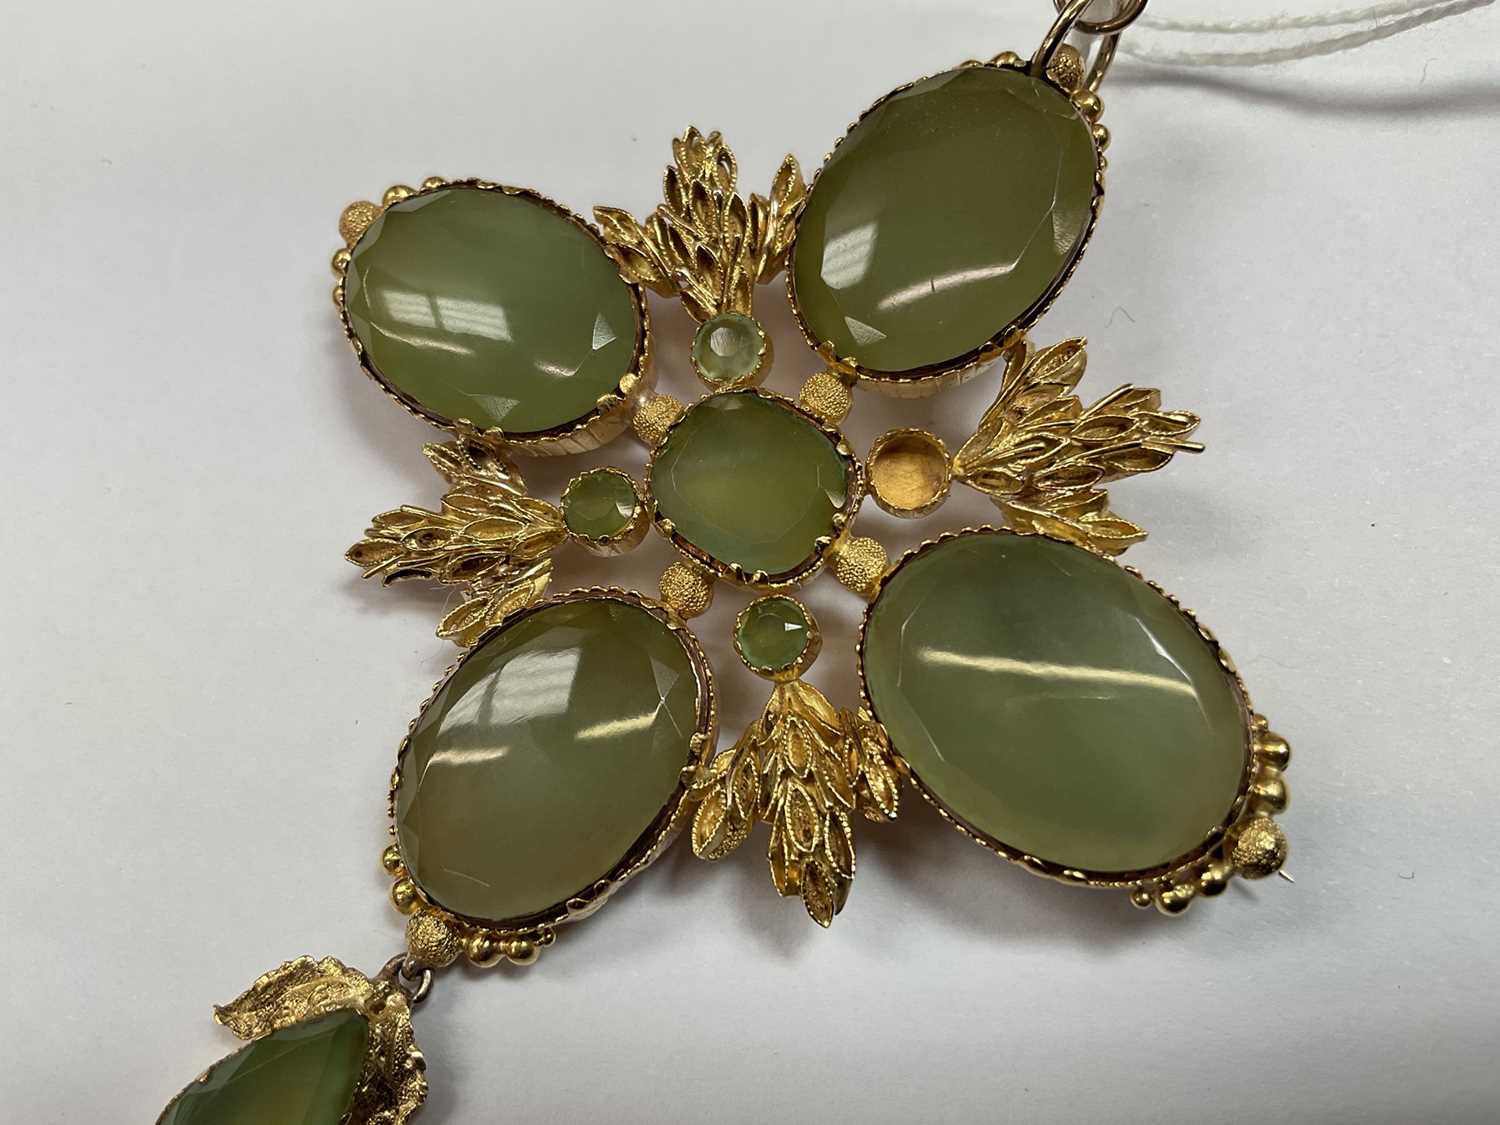 Regency-style gold and green stone pendant/brooch - Image 5 of 5